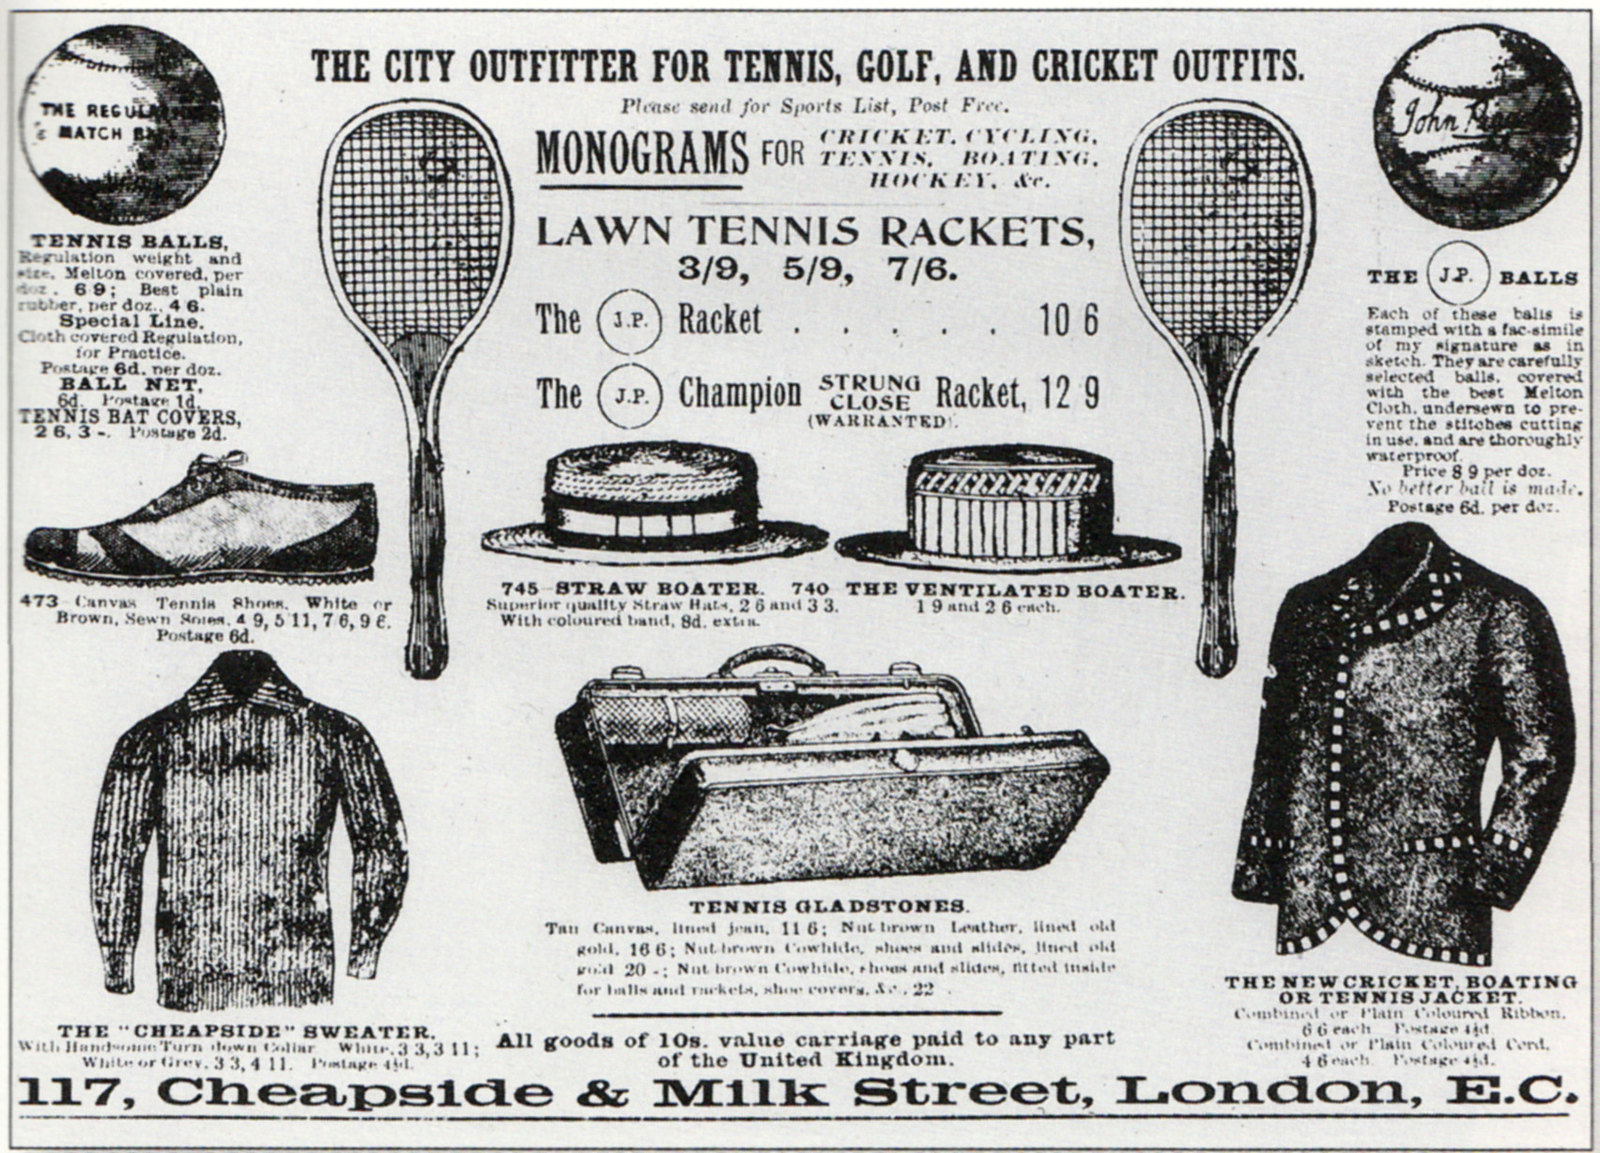 Early advertisement for tennis equipment, from an English newspaper.